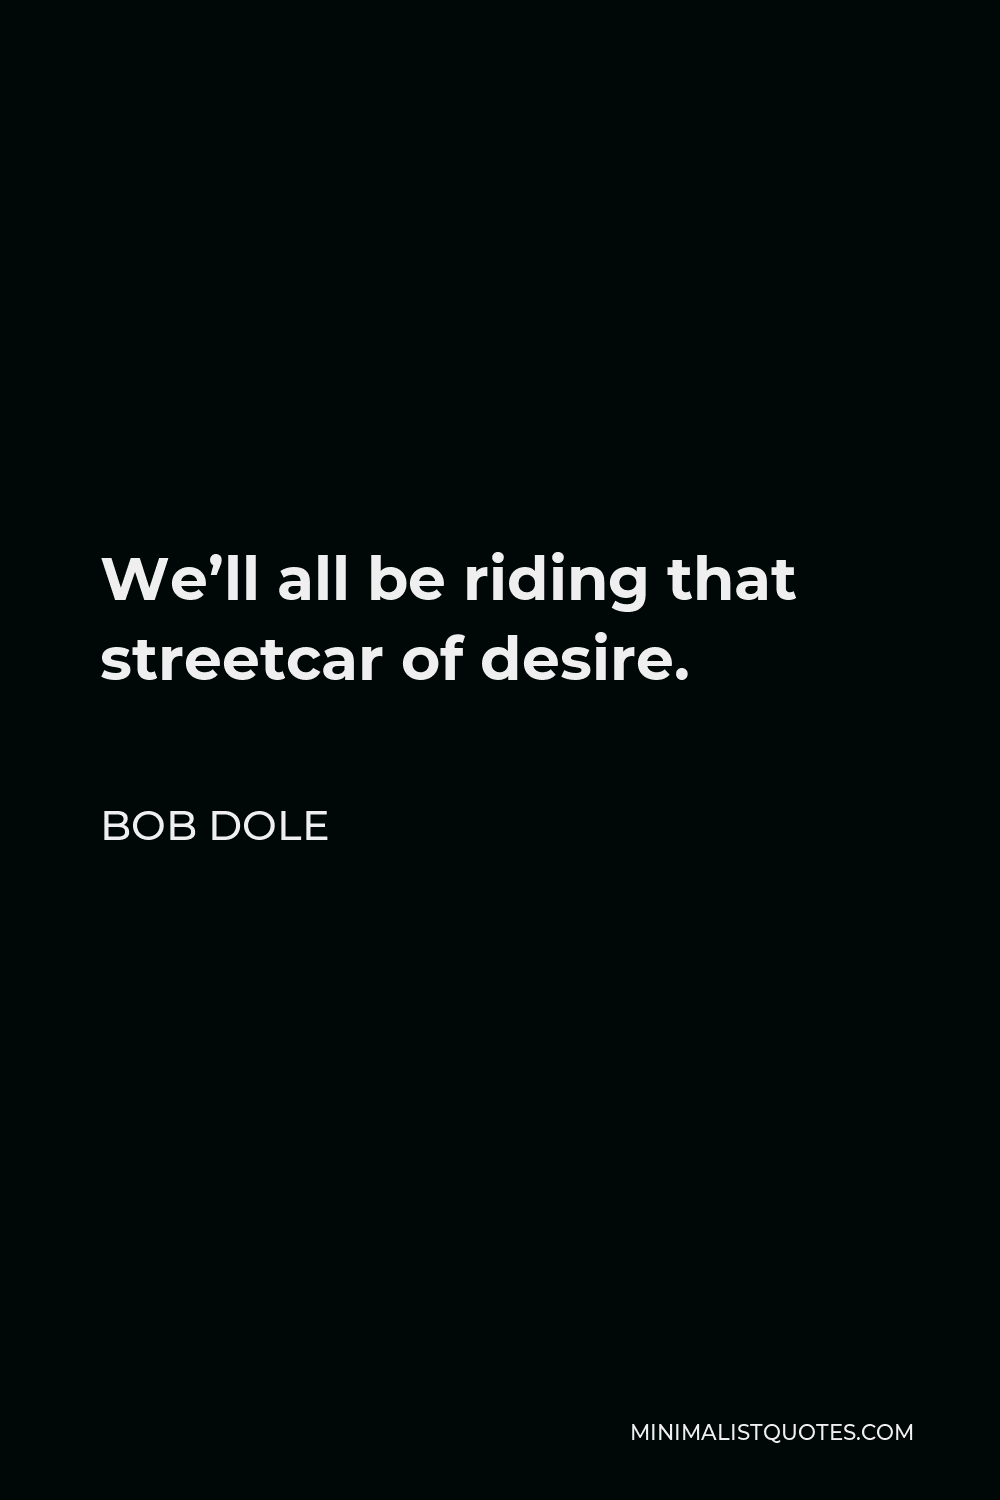 Bob Dole Quote - We’ll all be riding that streetcar of desire.